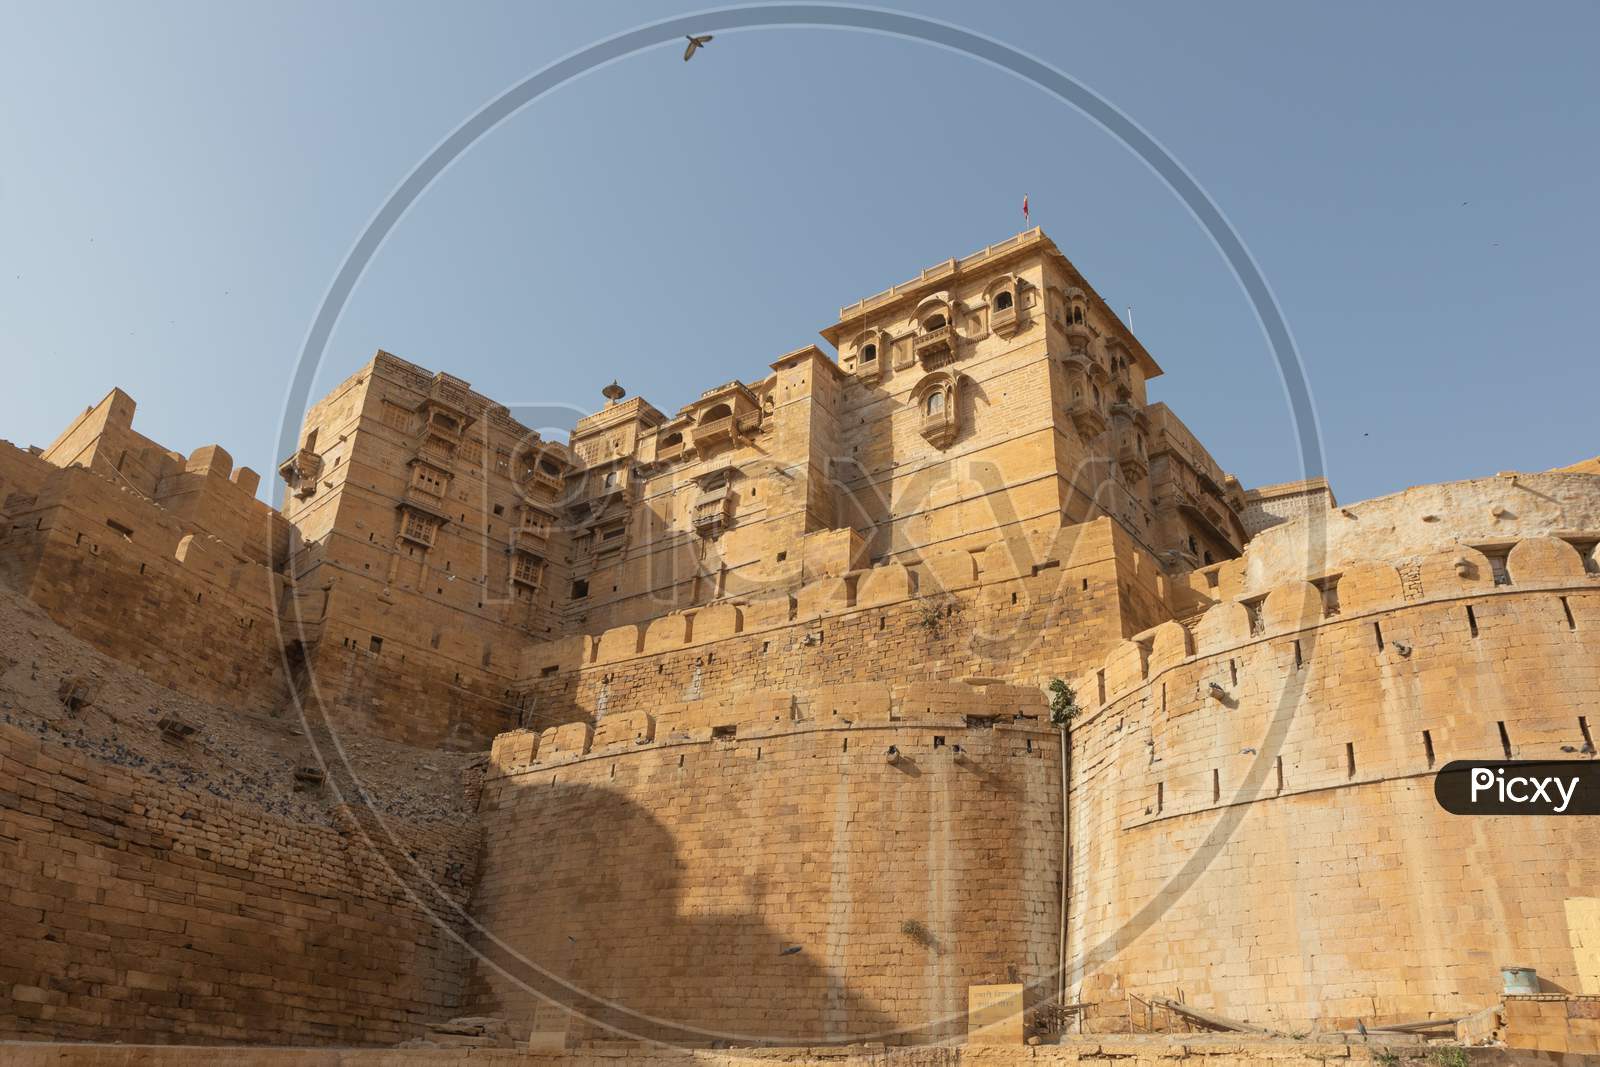 Front view of Jaisalmer fort taken from low angle